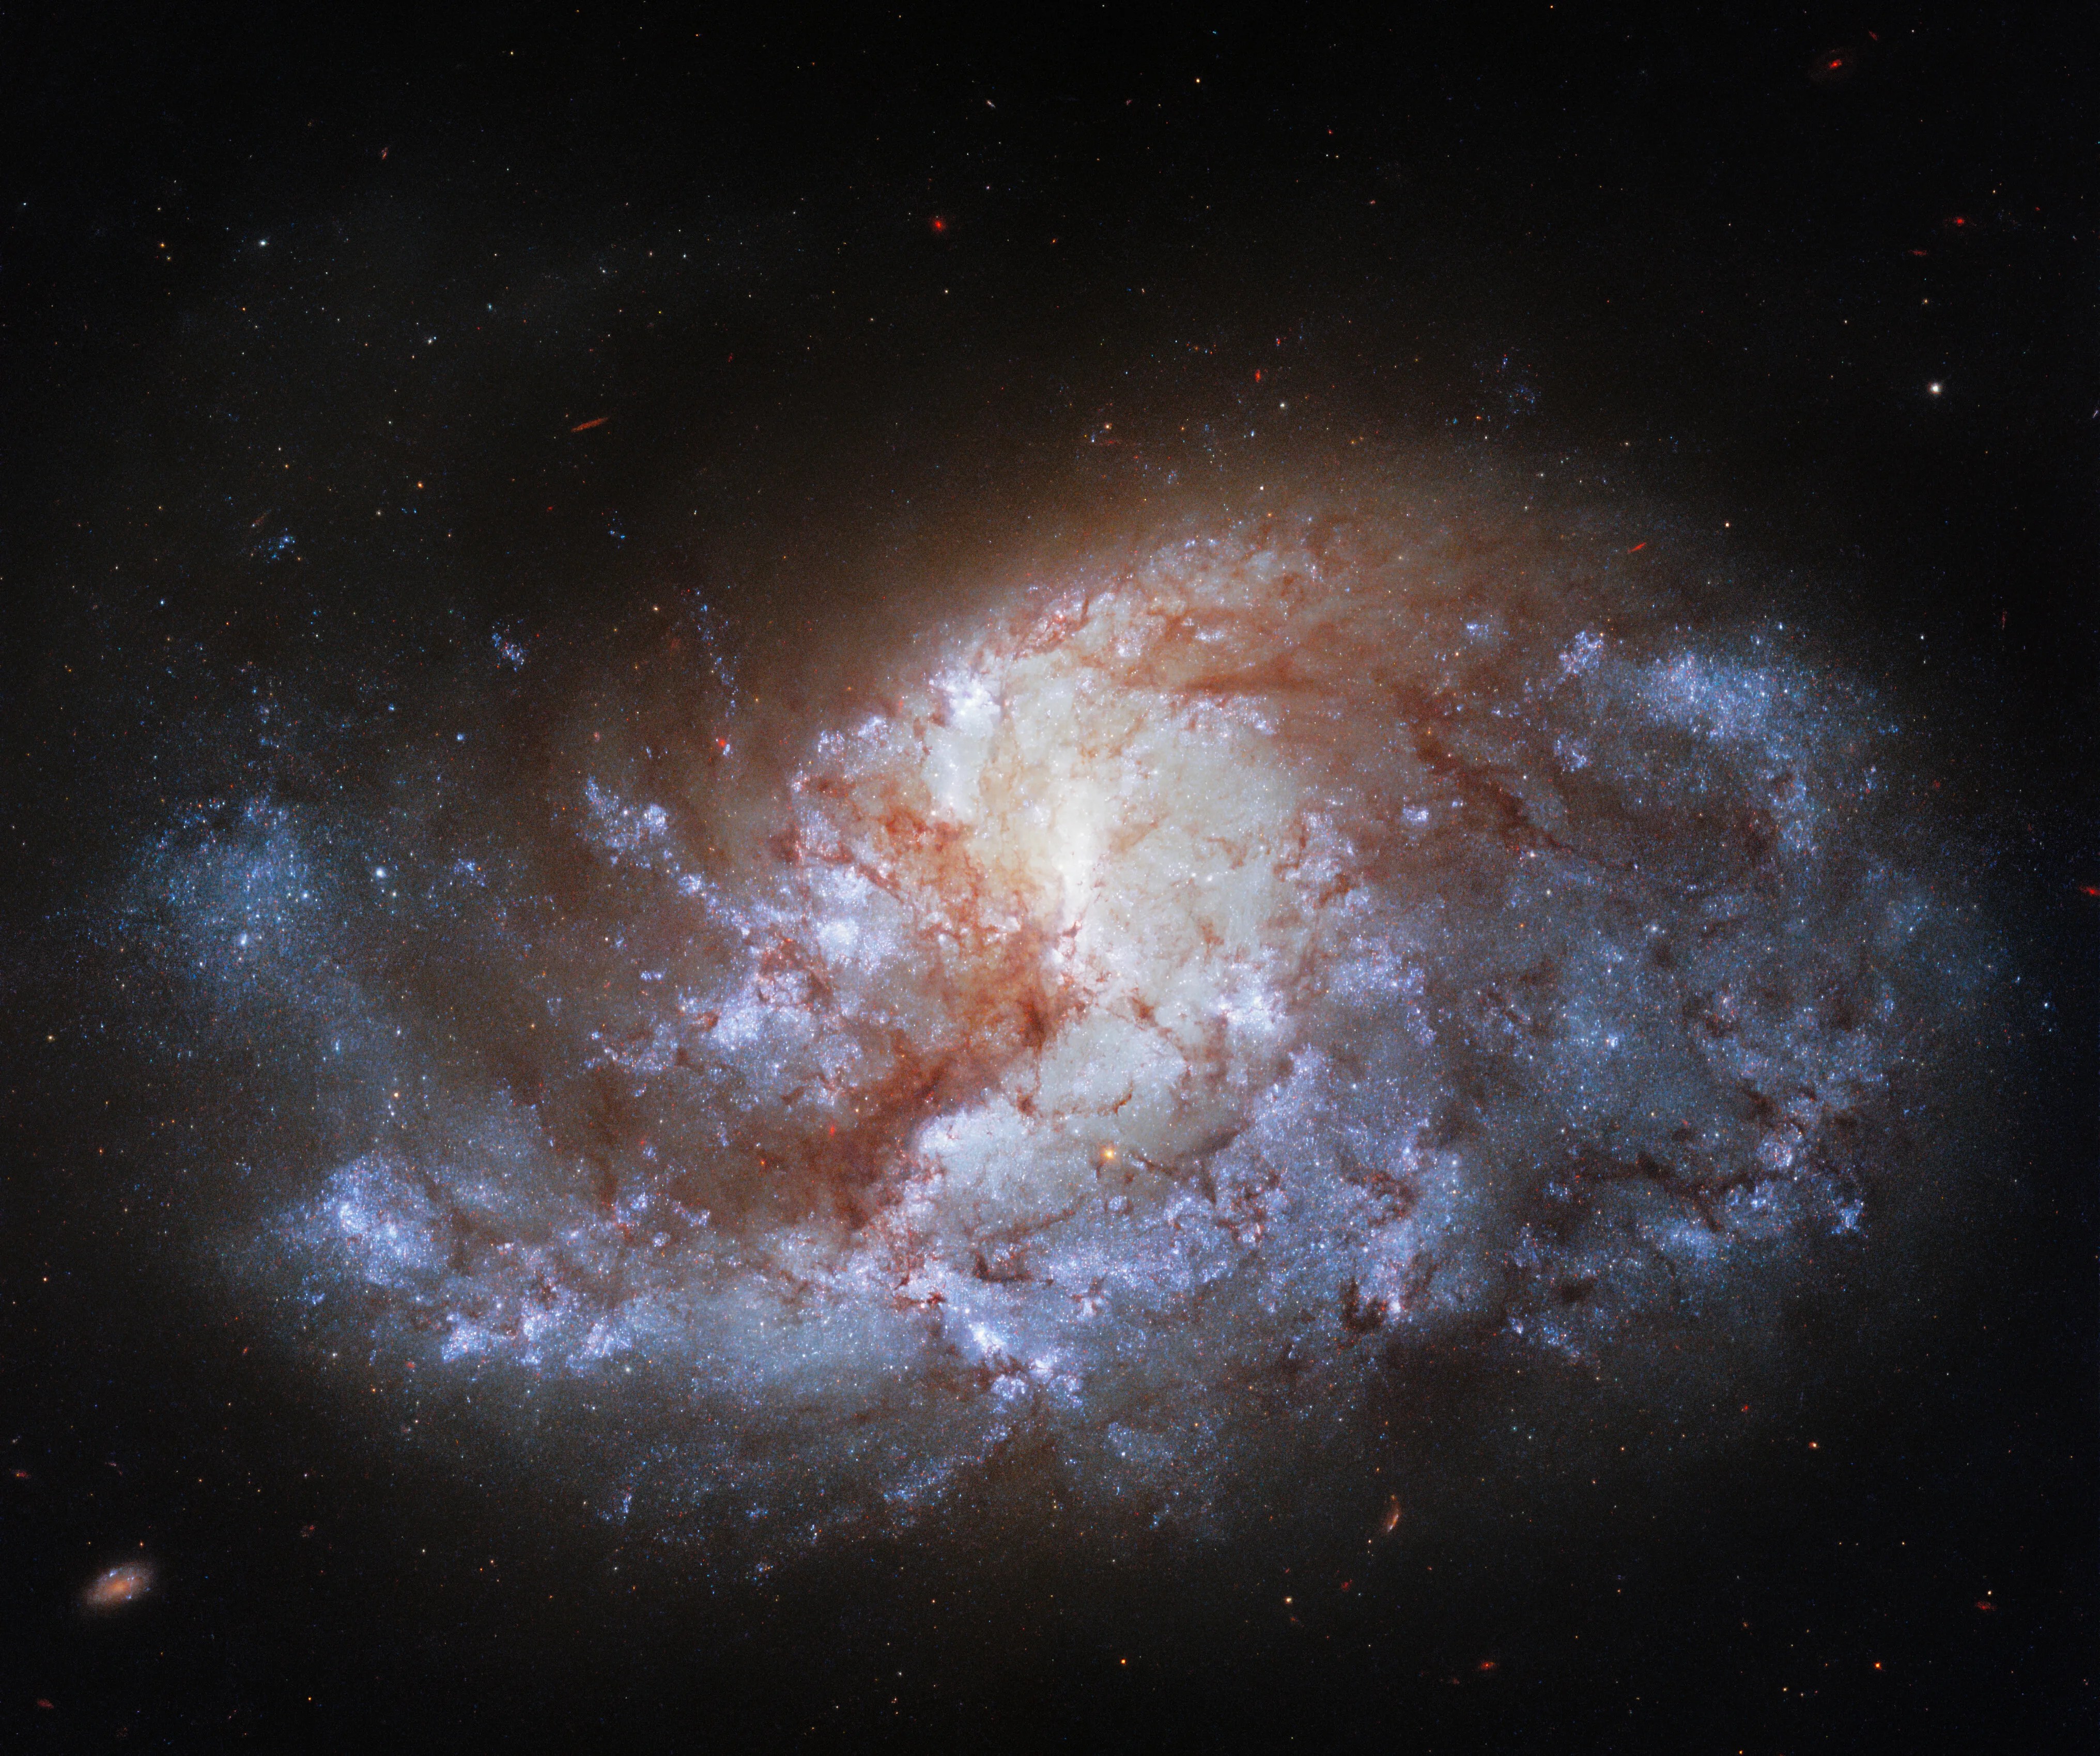 This jewel-bright image from the nasa/esa hubble space telescope shows ngc 1385, a spiral galaxy 68 million light-years from earth, which lies in the constellation fornax.